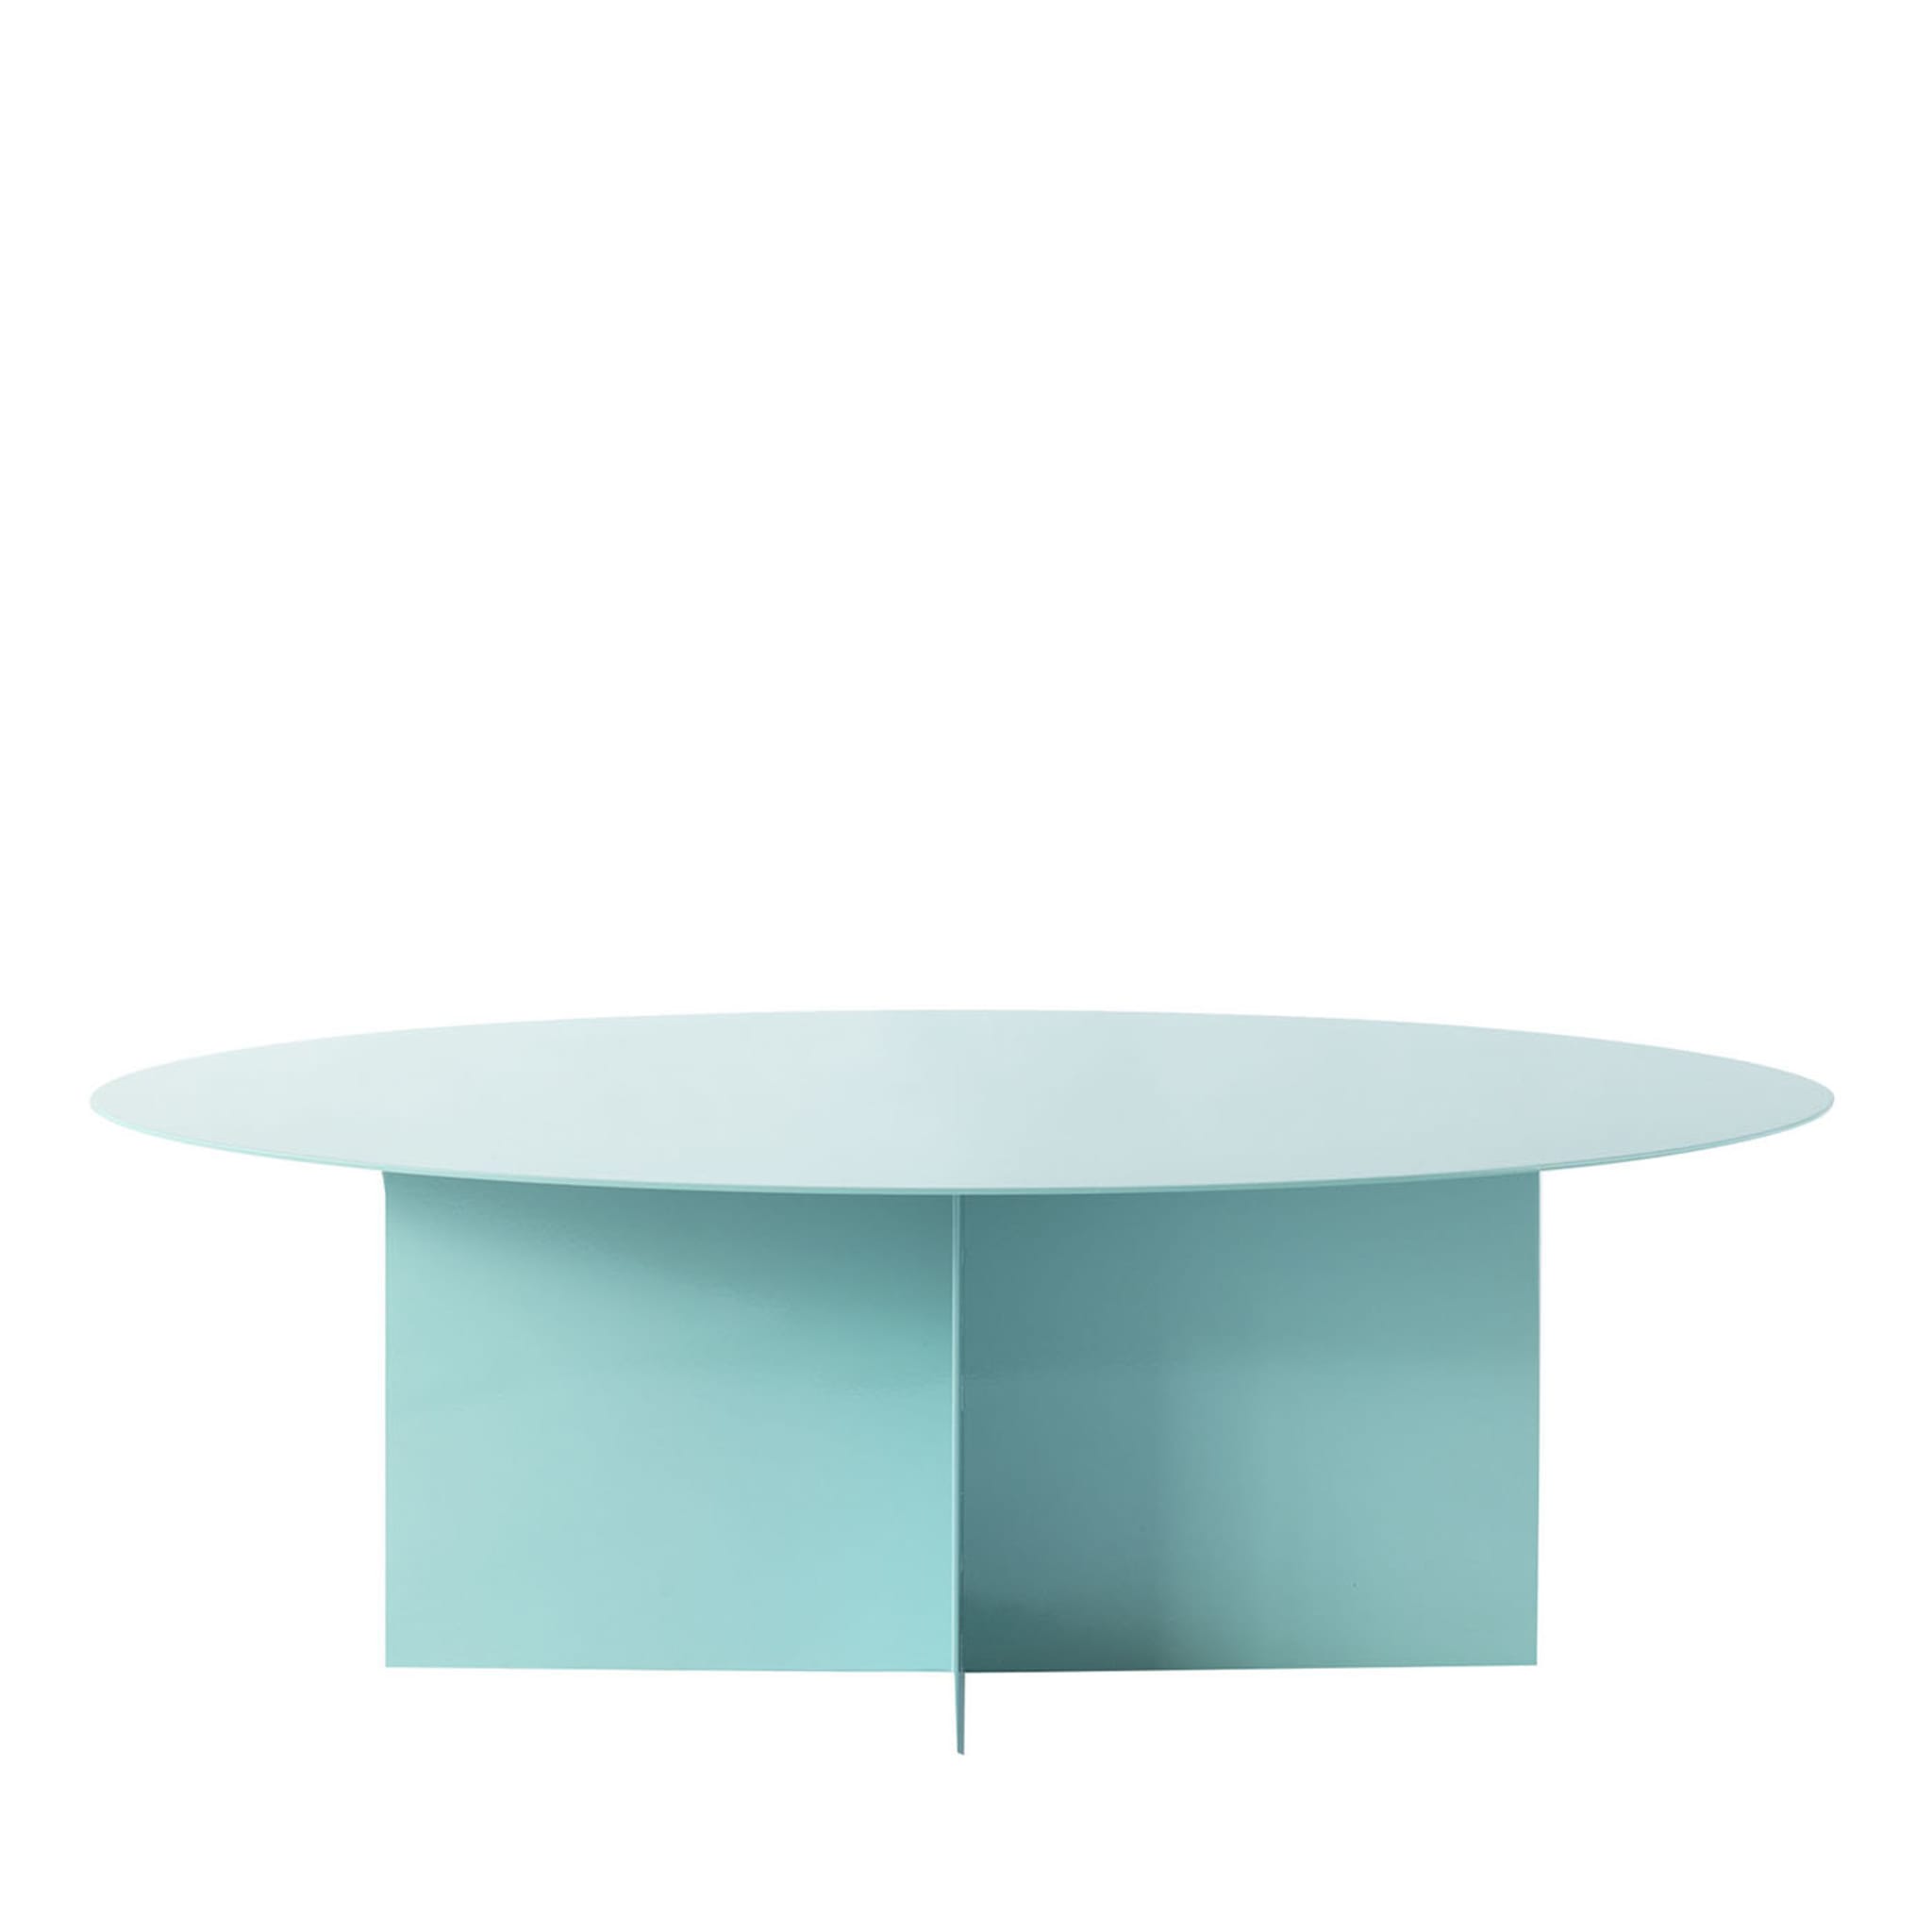 Across Oval Coffe Table Elliptical by Claudia Pignatale - Main view